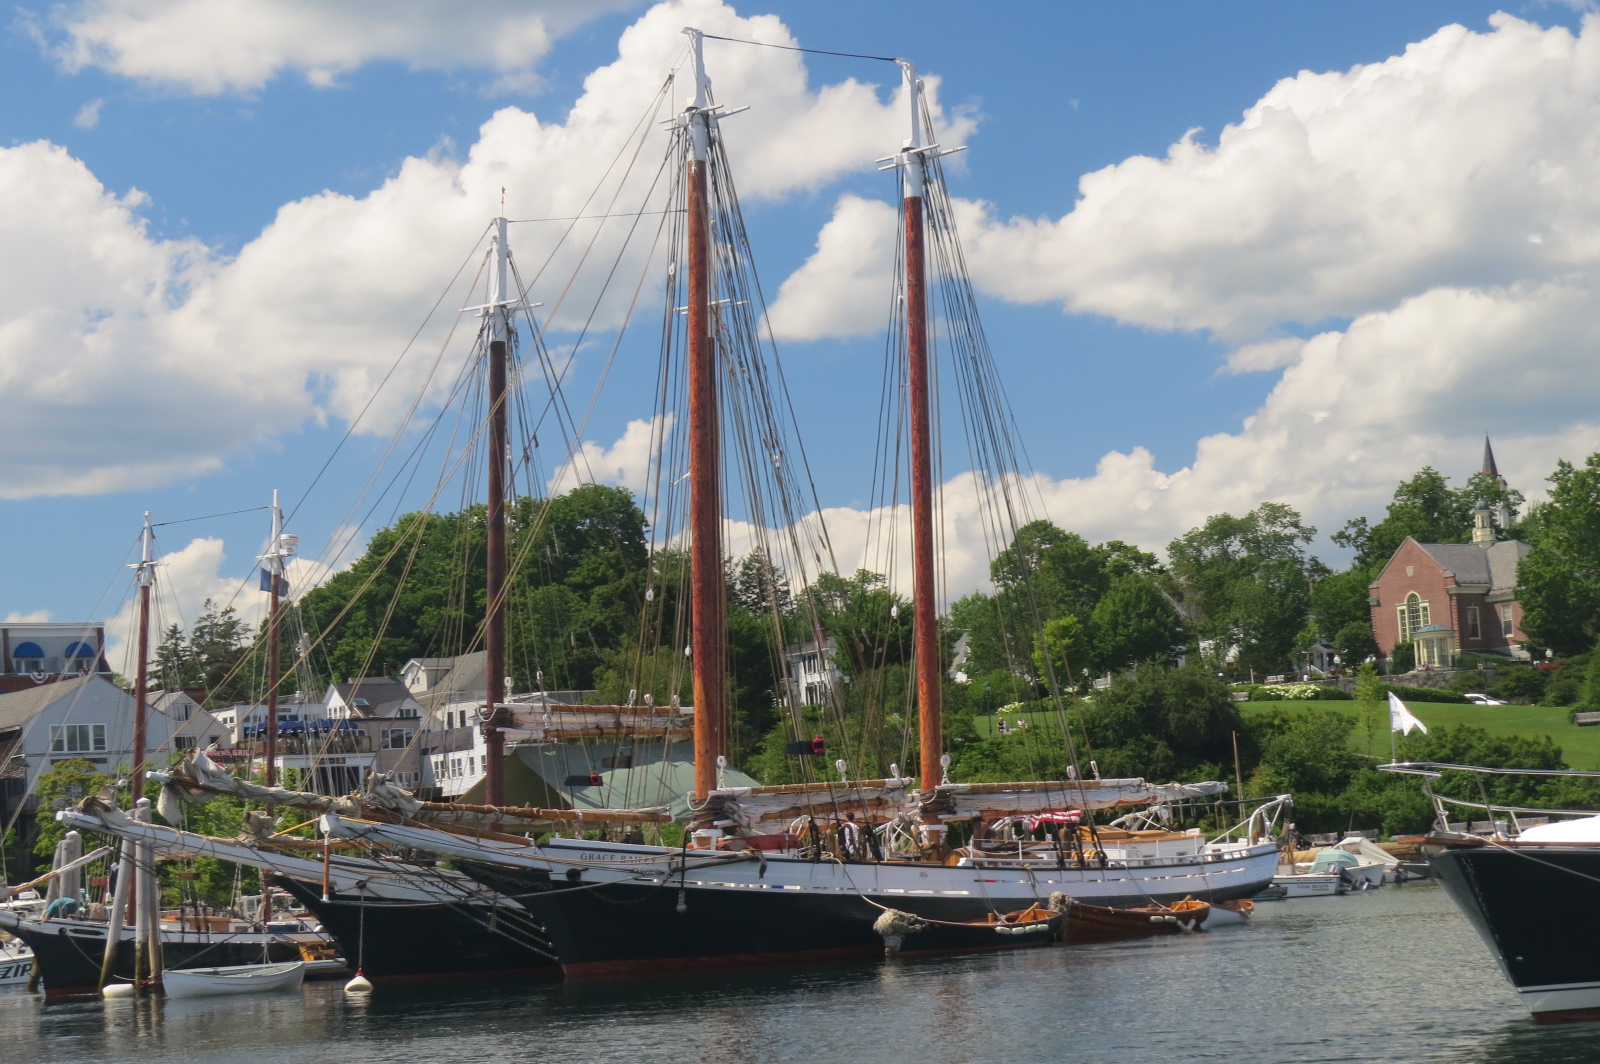 Wooden boats in Rockland harbor